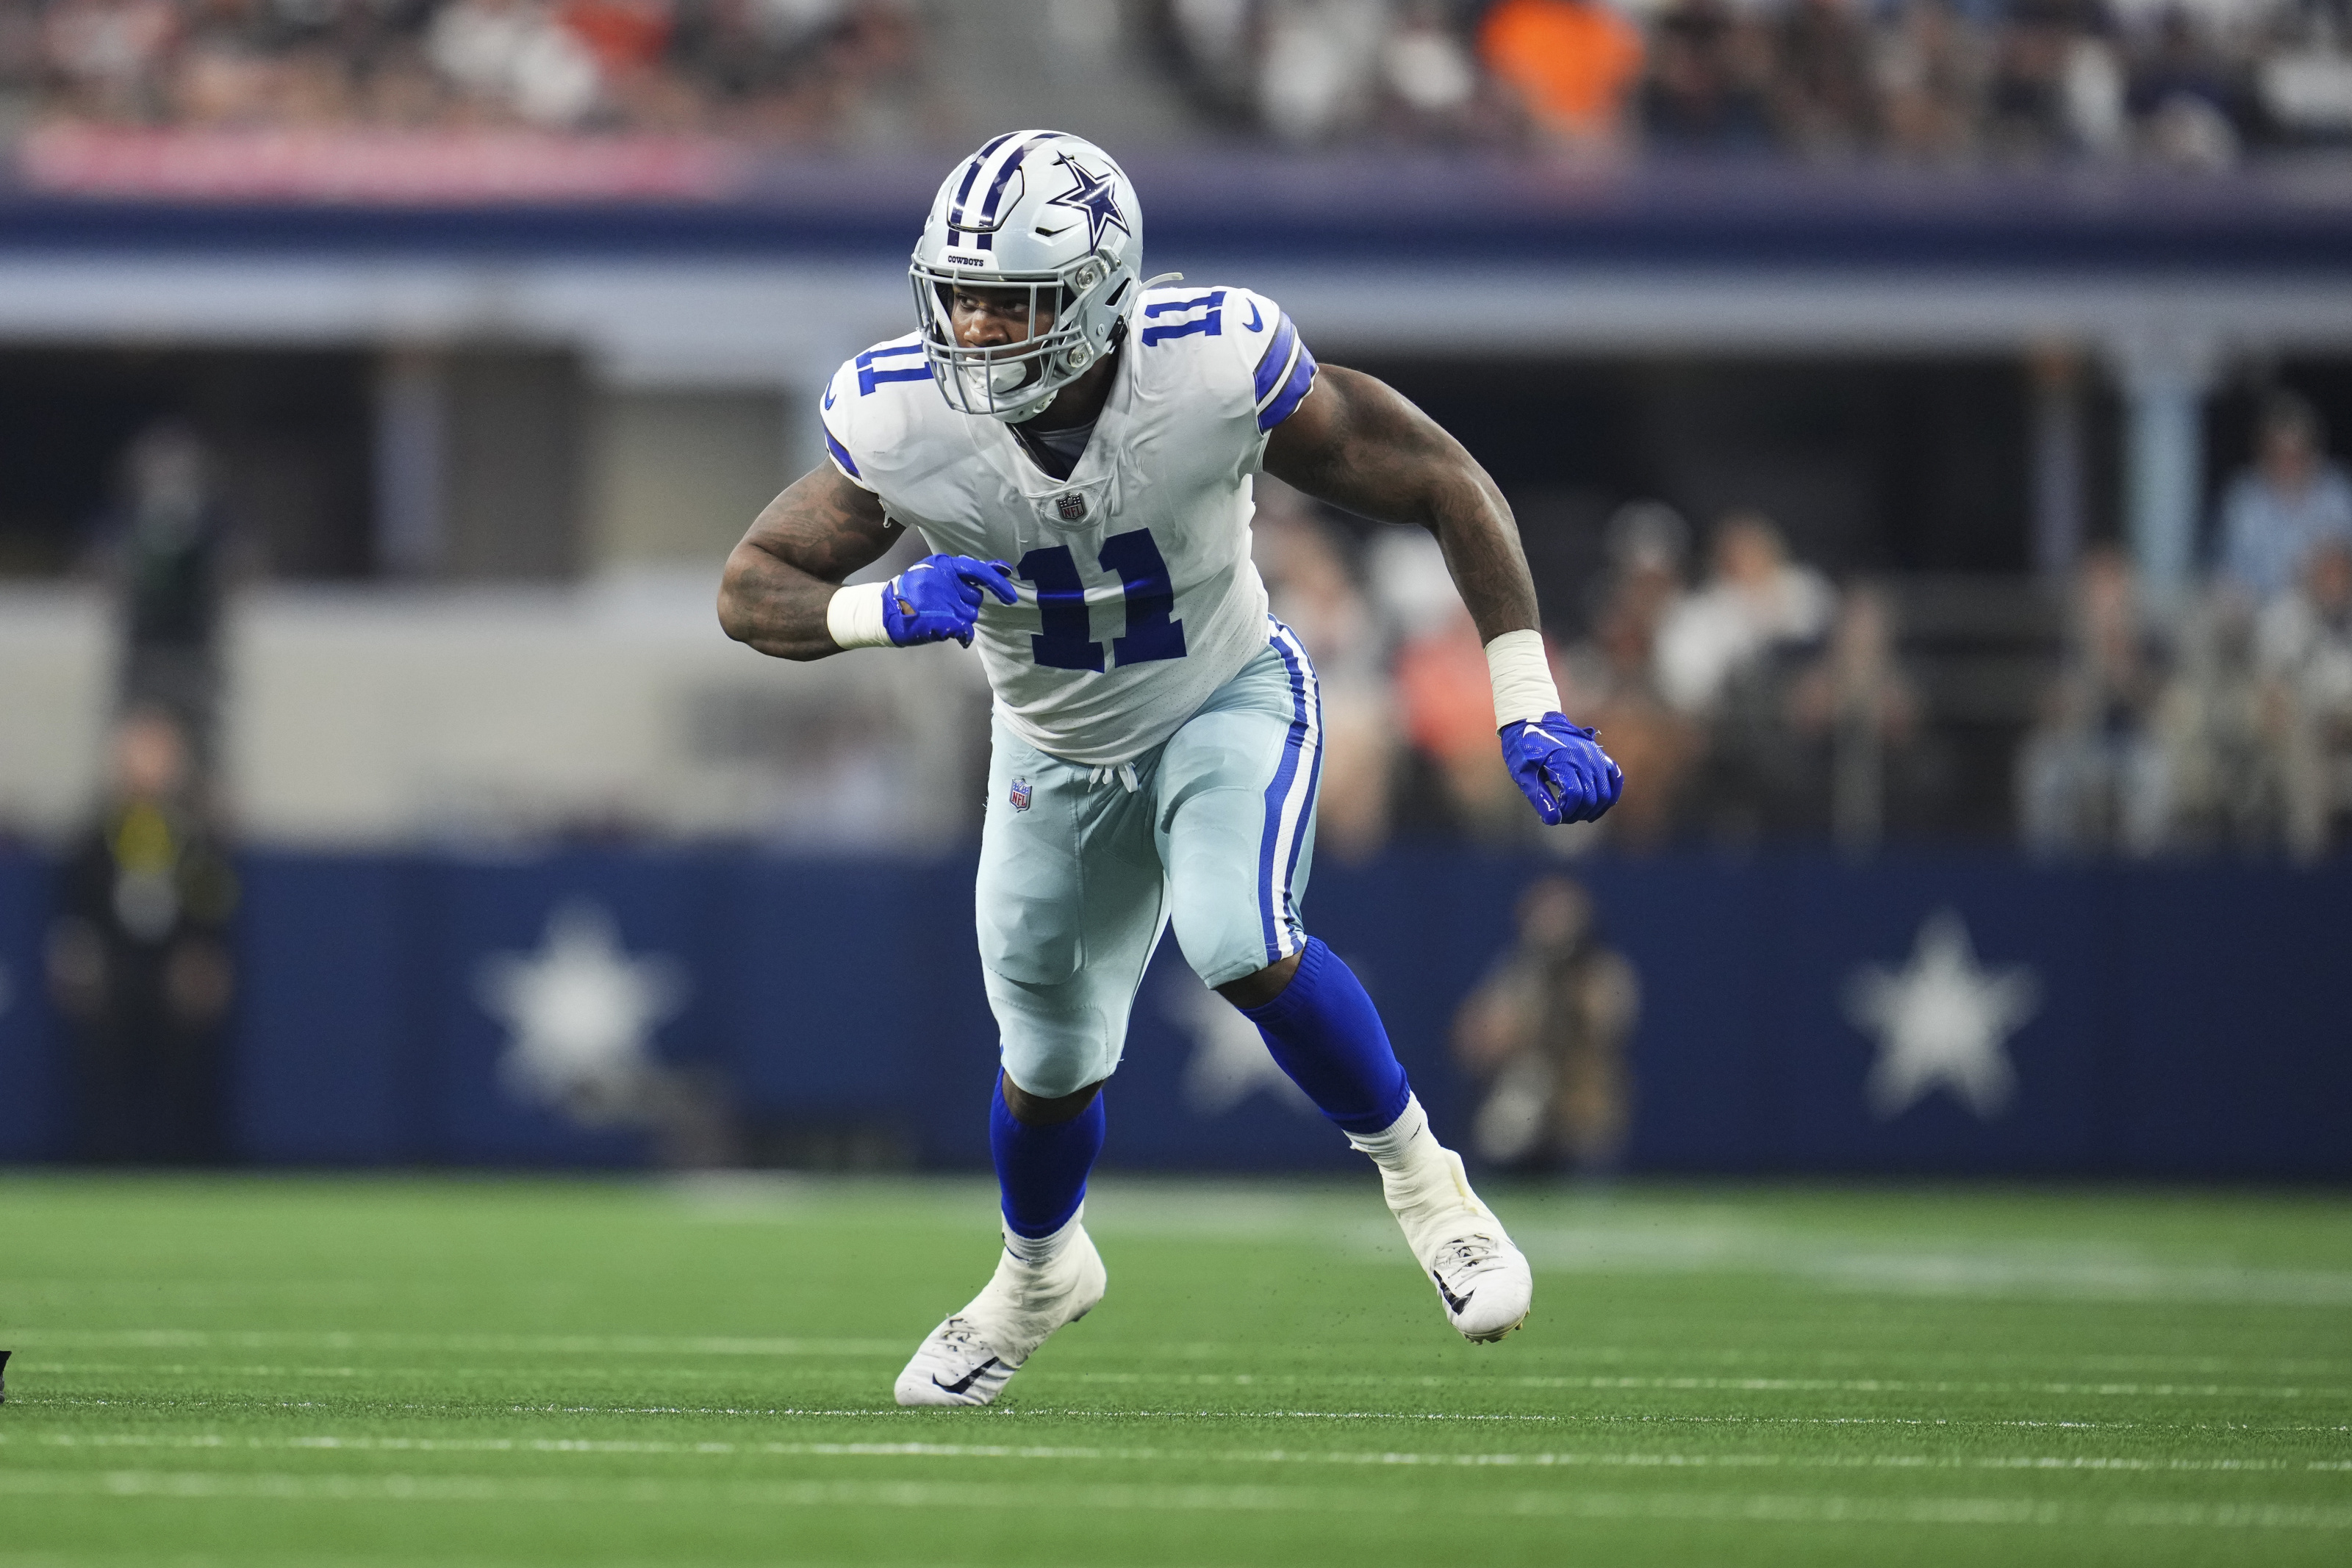 Madden 23 ratings and preview - Best NFL players, rookies, 99 club